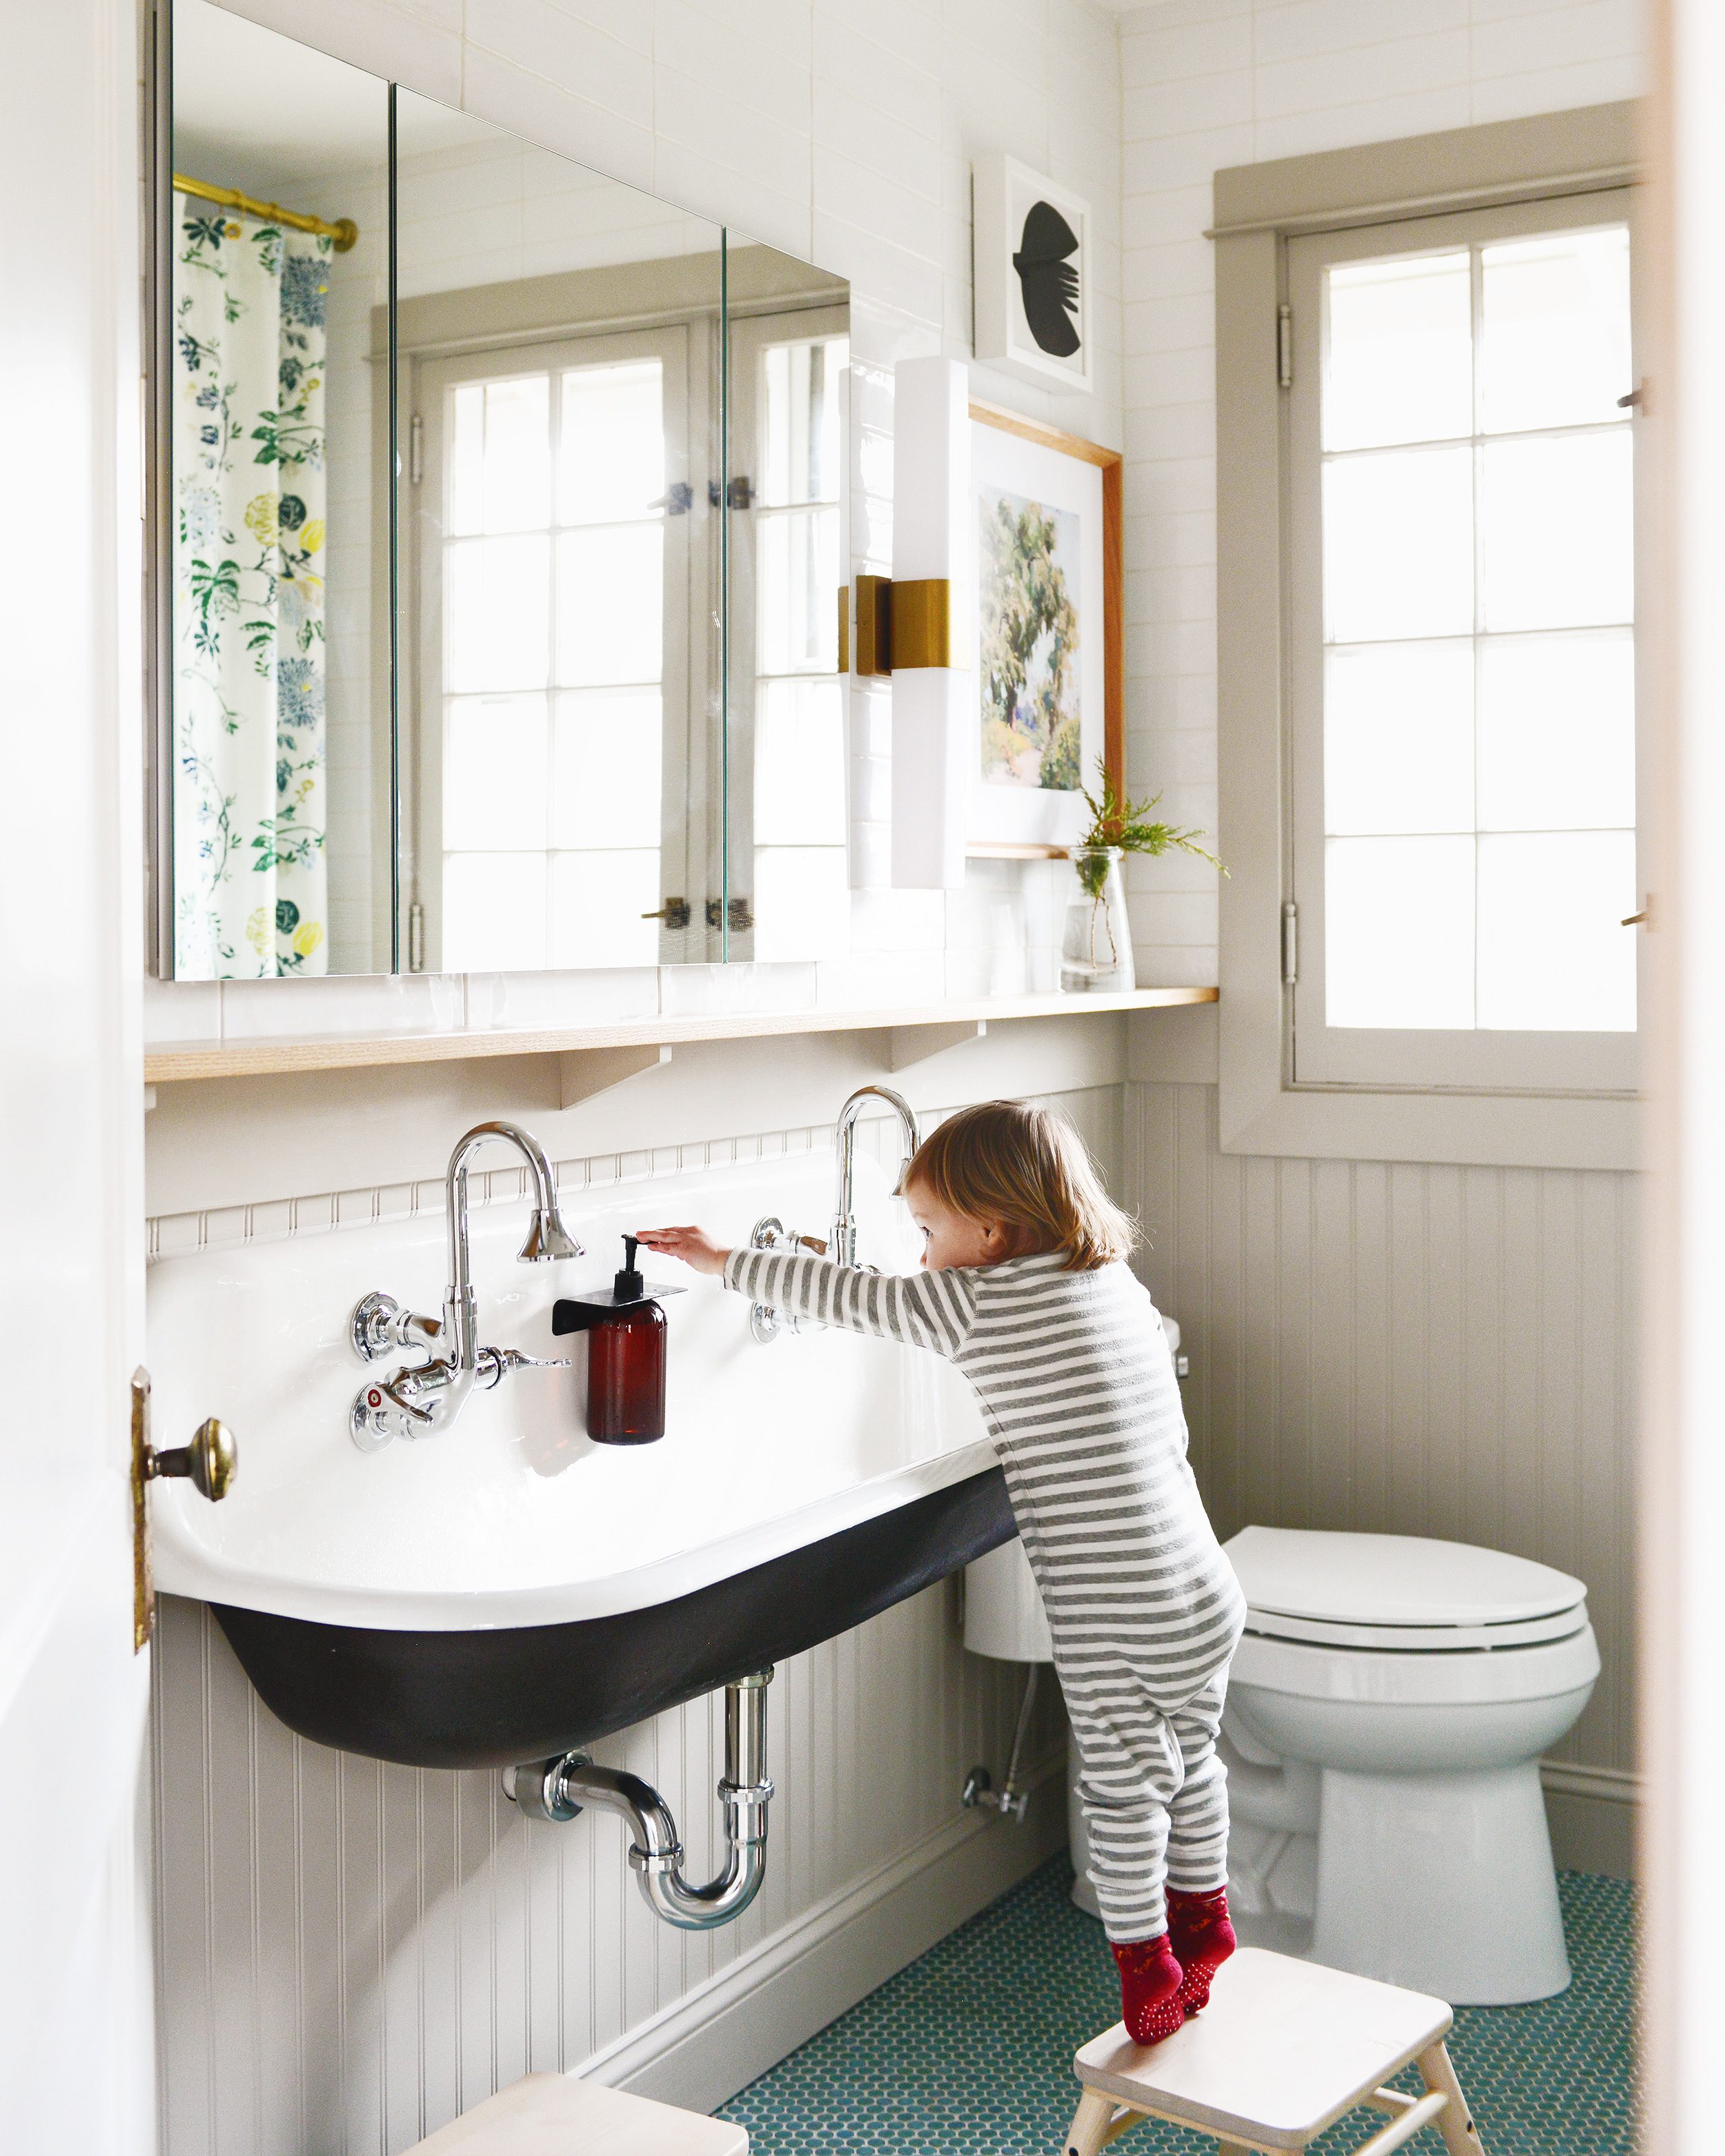 A toddler on her tip toes washes her hands in a large basin sink in a tan and green bathroom // via Yellow Brick Home